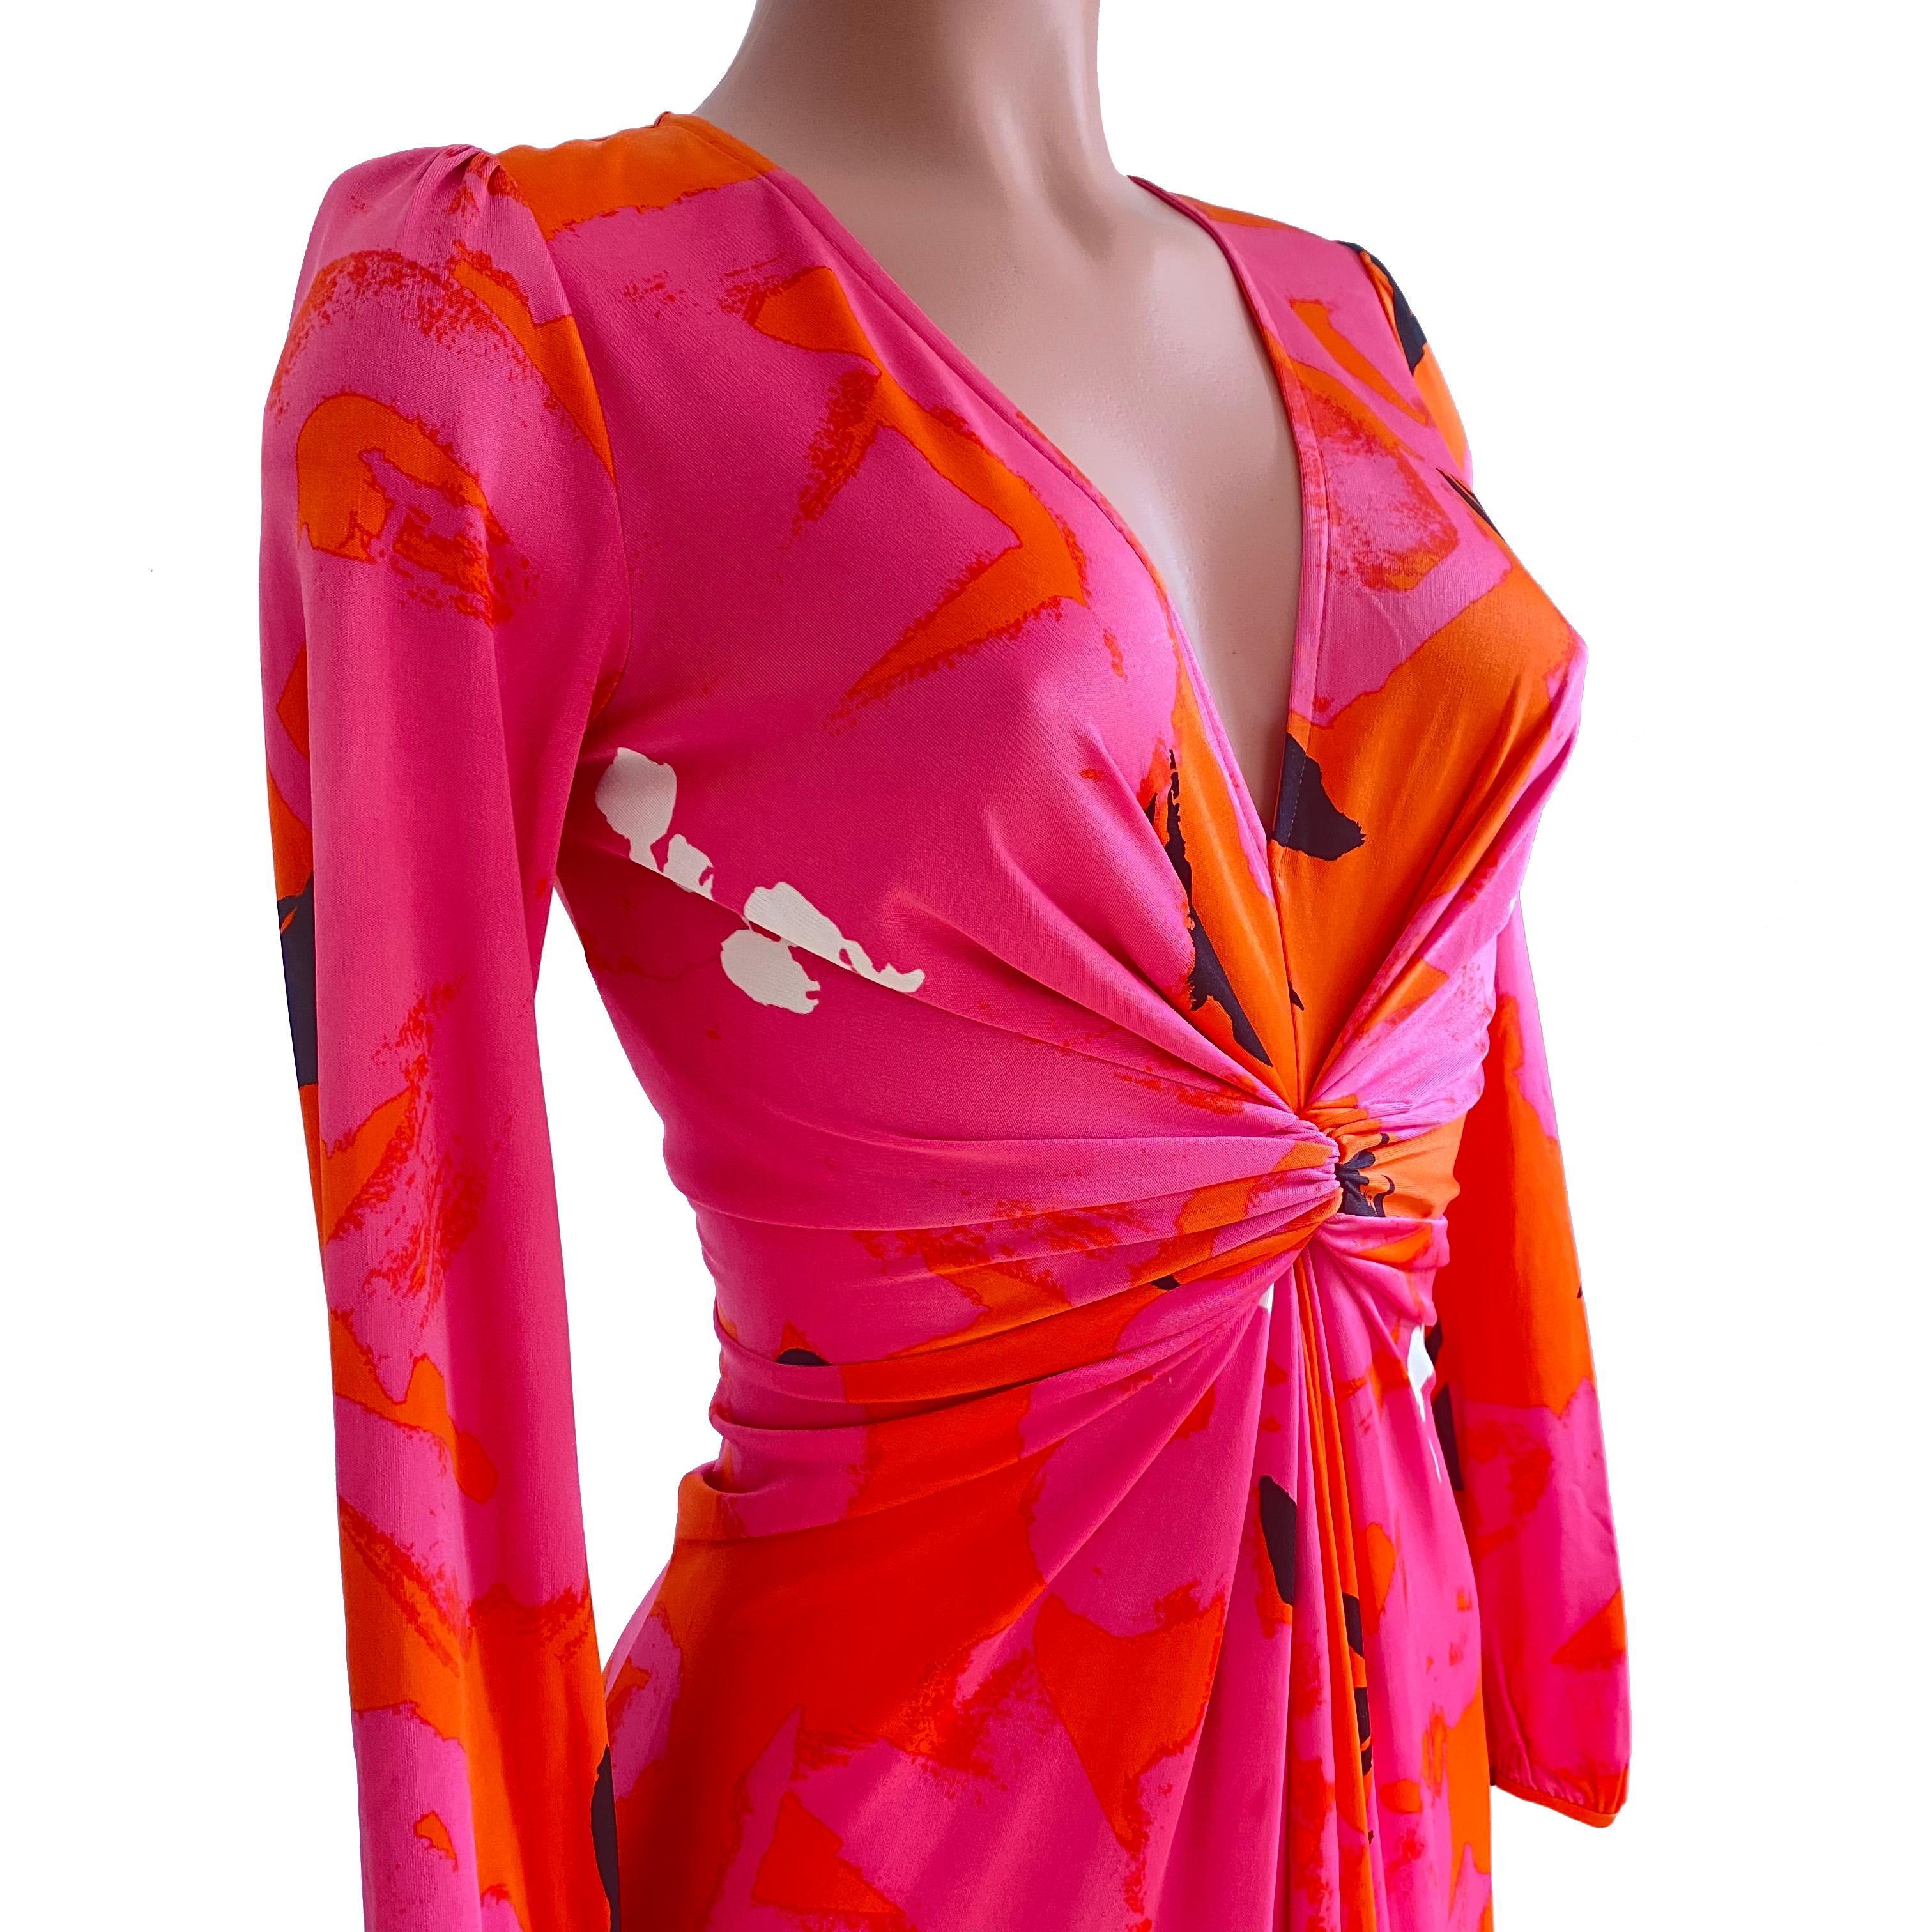 Flattering and classy dress with deep plunge V-neck. 
In original rich pink and deep orange floral print.
Invisible back zipper for easy entry, slightly flared skirt with hidden pleat at front.
Approximately 39